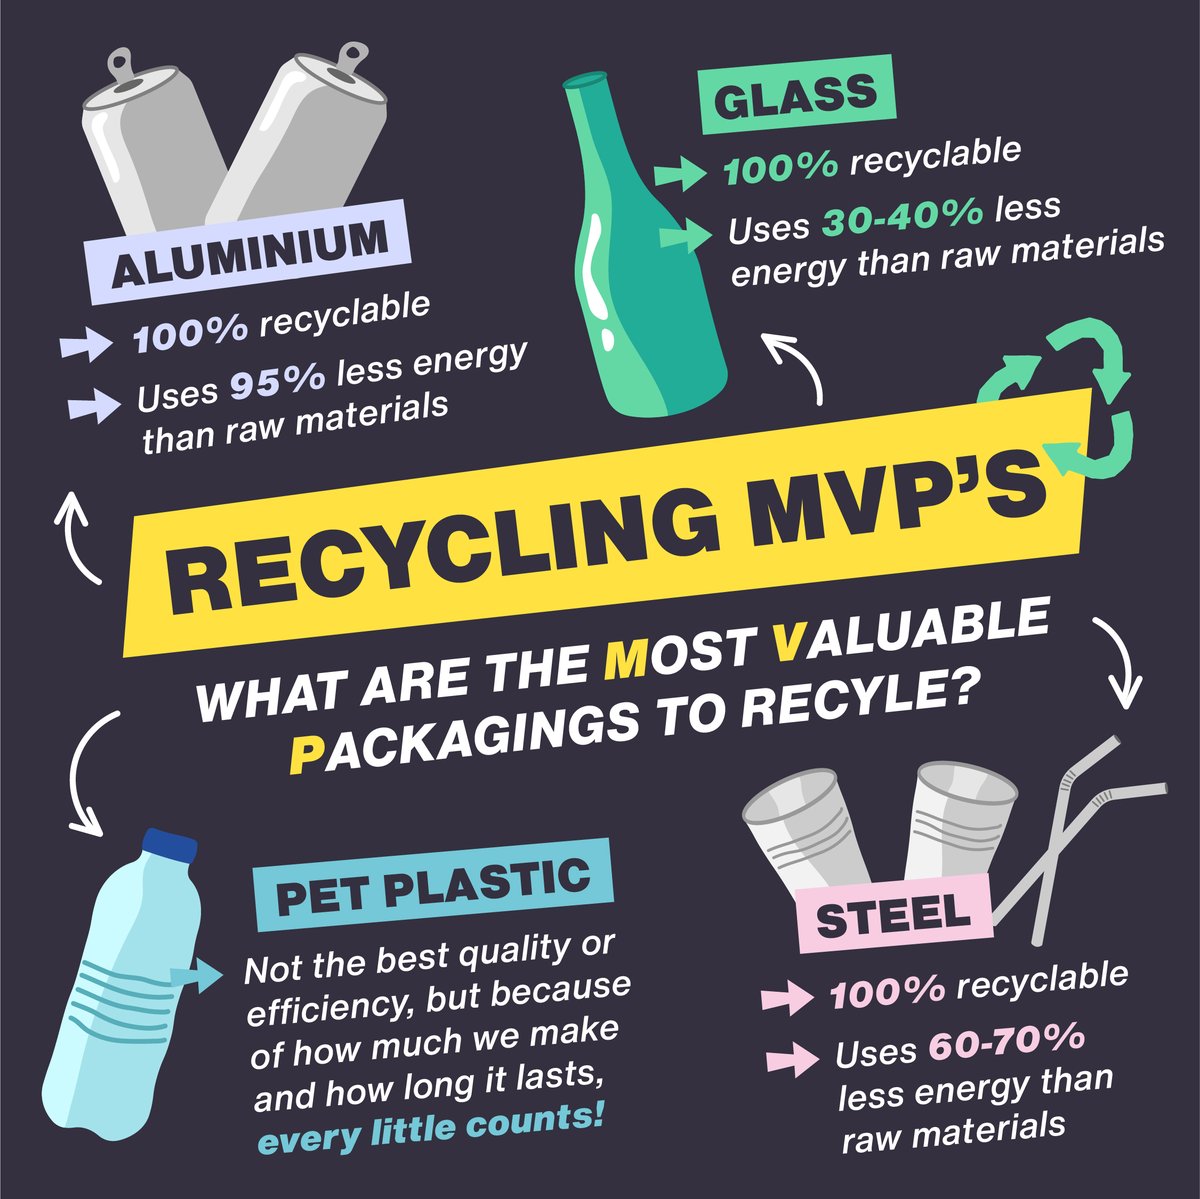 Meet the MVPs of #recycling 😎 Ever wondered what is the 'most' recyclable out of all your packaging? If you're going to nag your housemates about the recycling bin, these are the key ones to speak about! #NationalRecyclingWeek